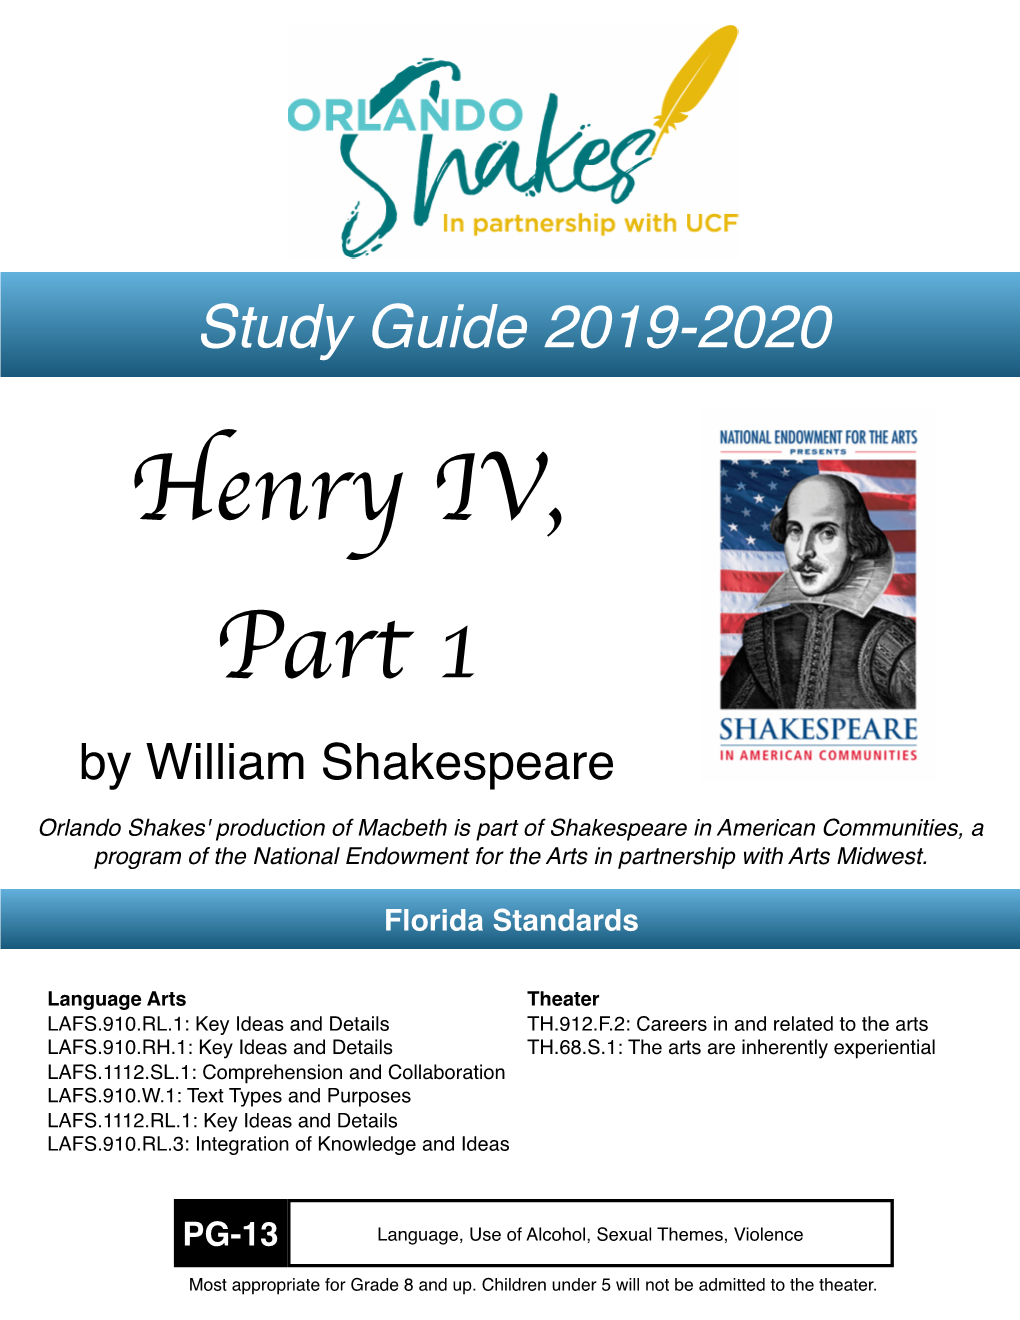 Henry IV Part 1 Study Guide